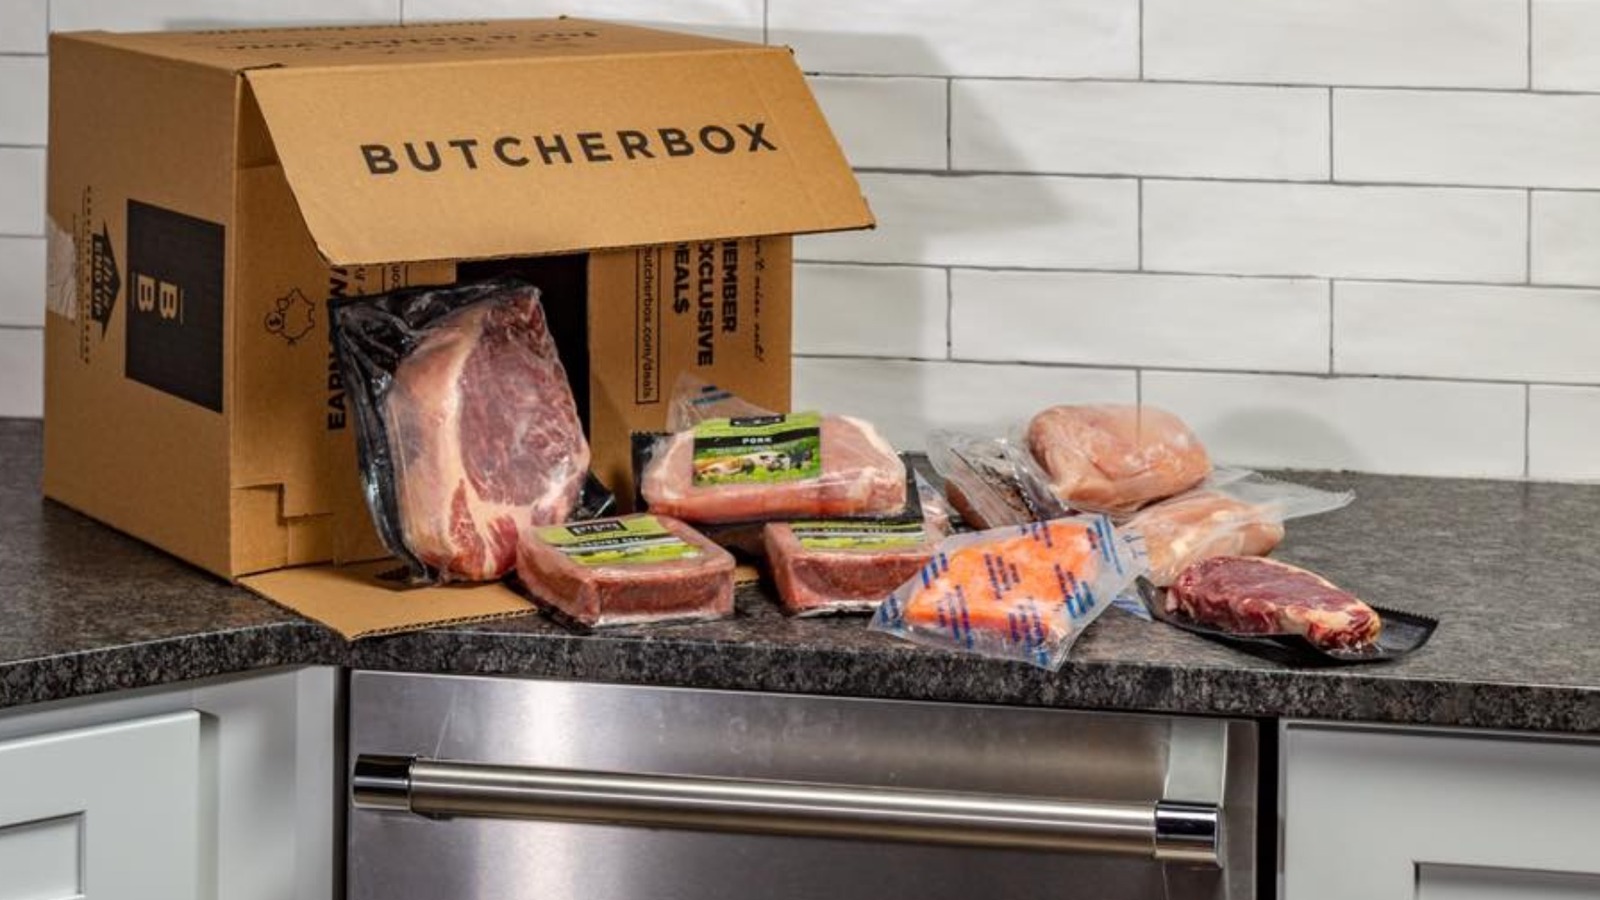 ButcherBox launches in BJ's Wholesale Club